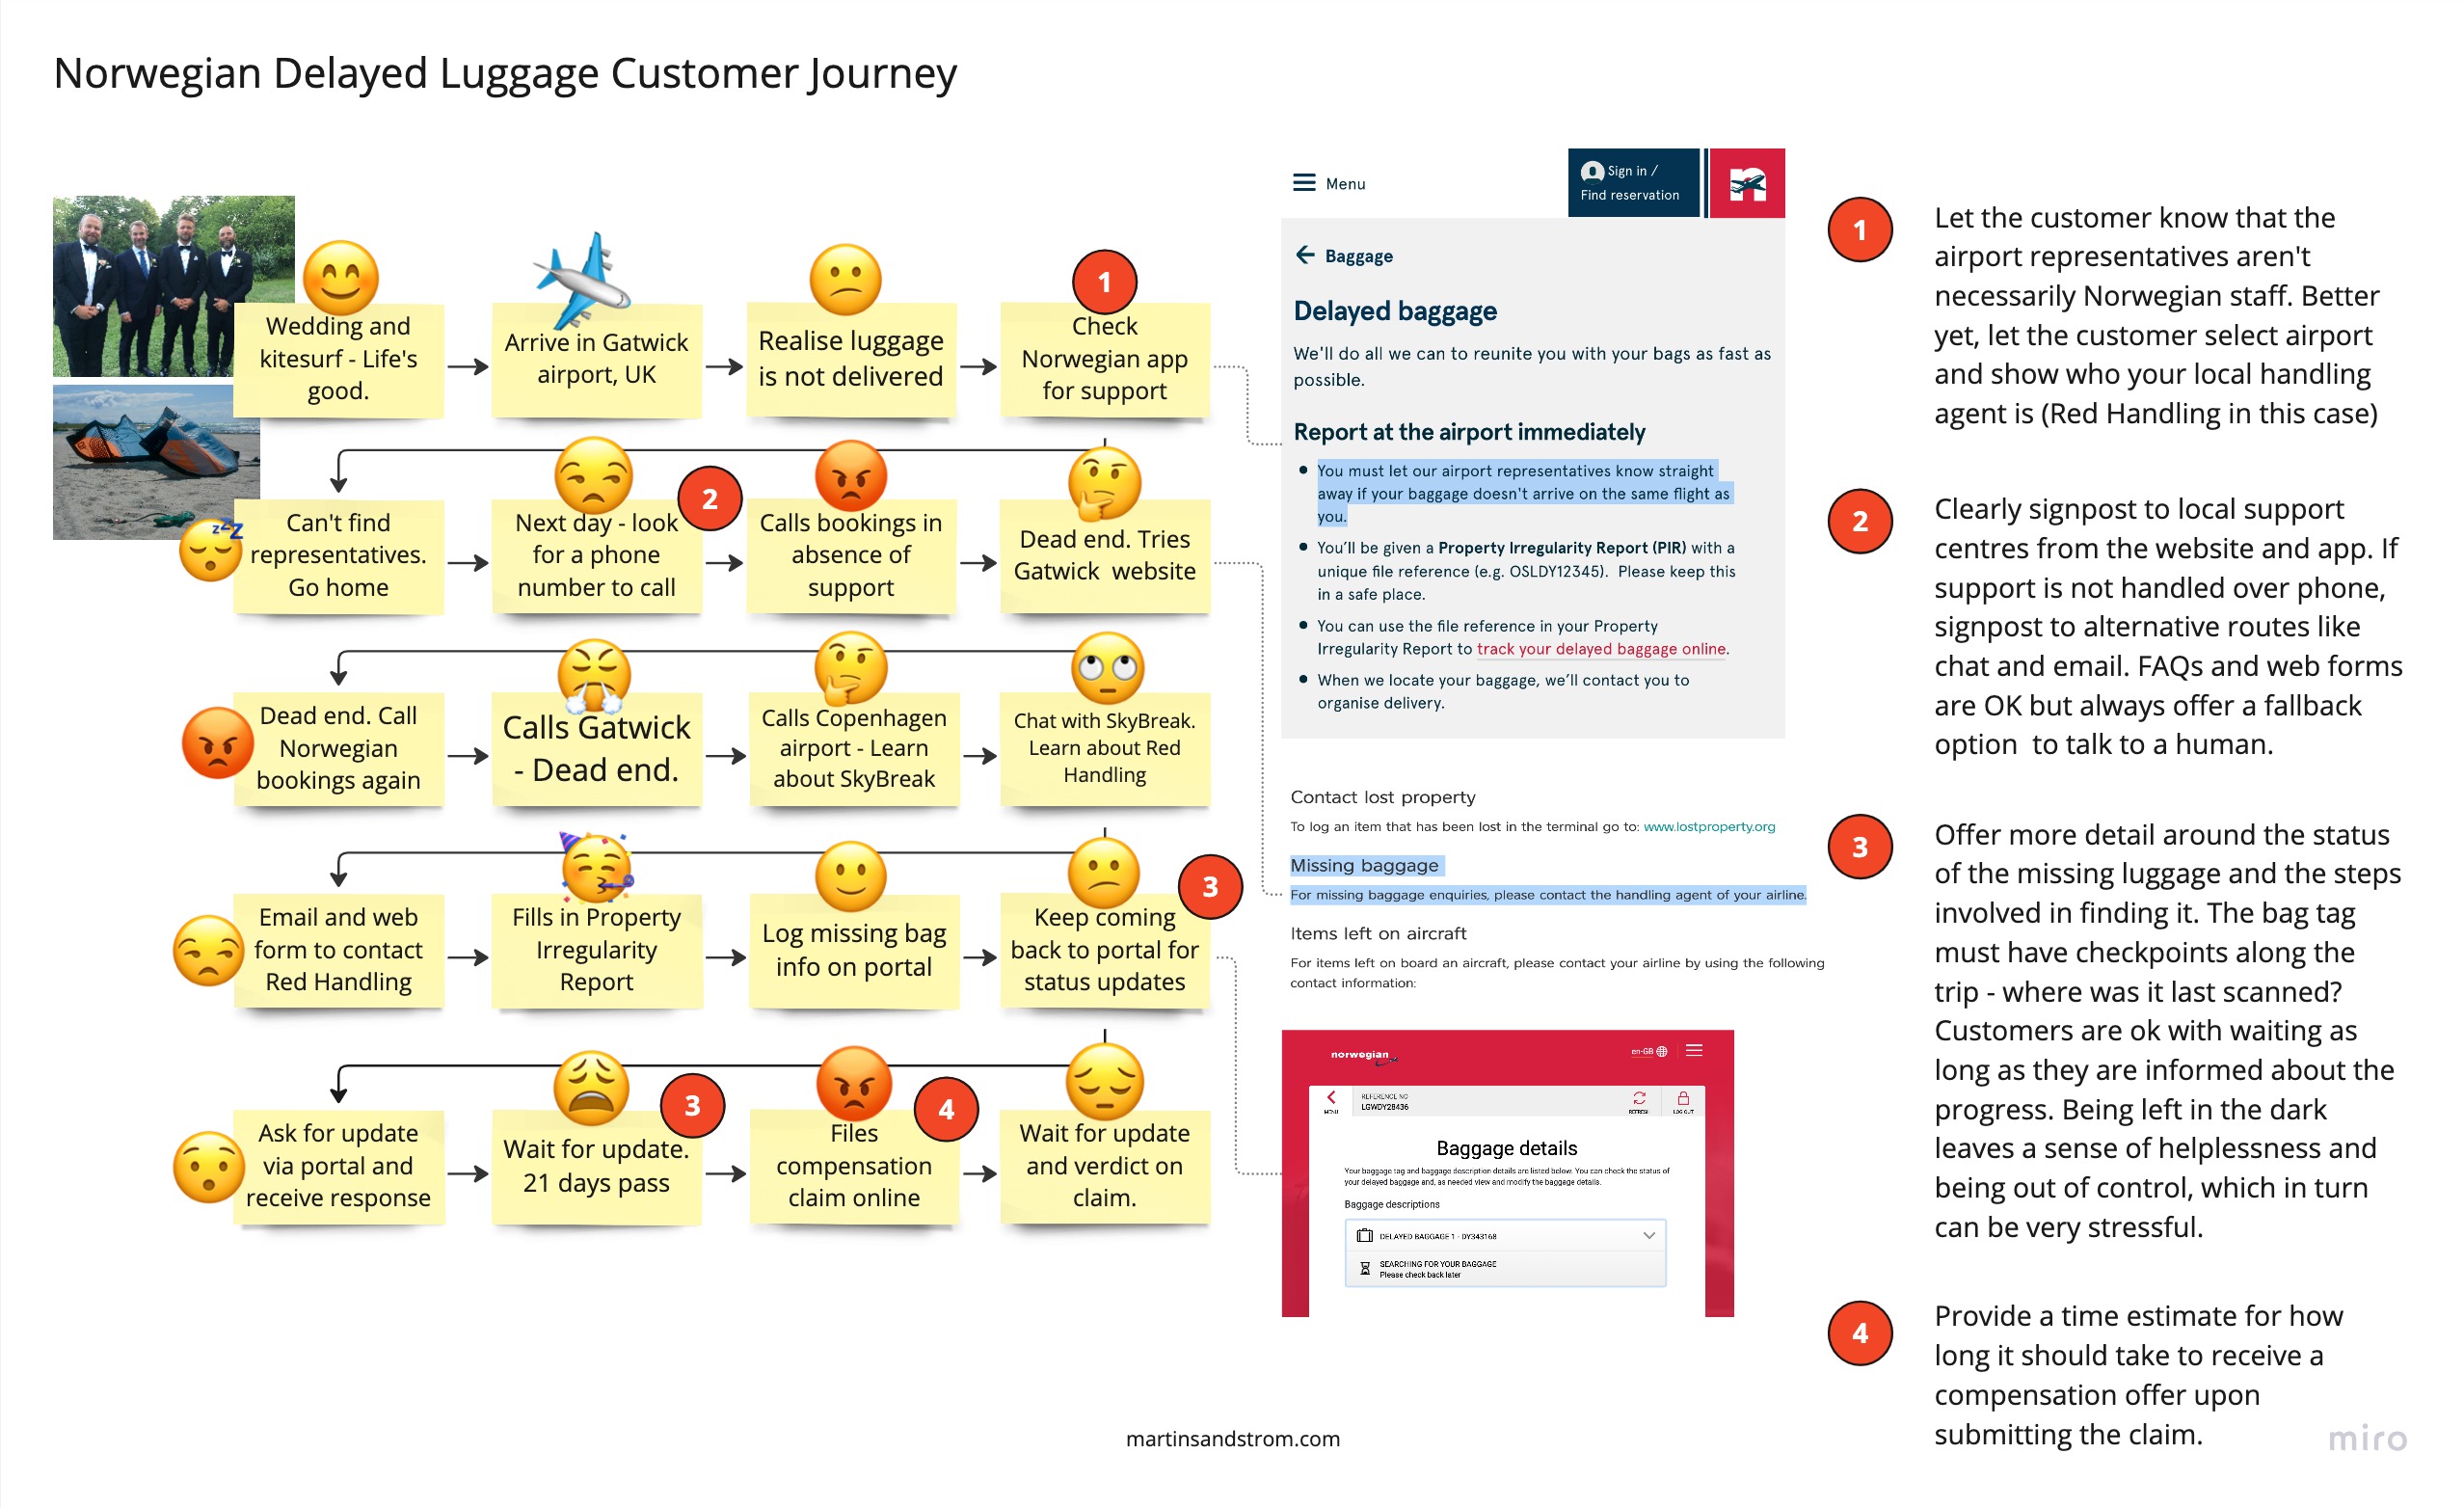 Customer journey for delayed or lost luggage with Norwegian airlines. Presented with key moments where improvements can be made.